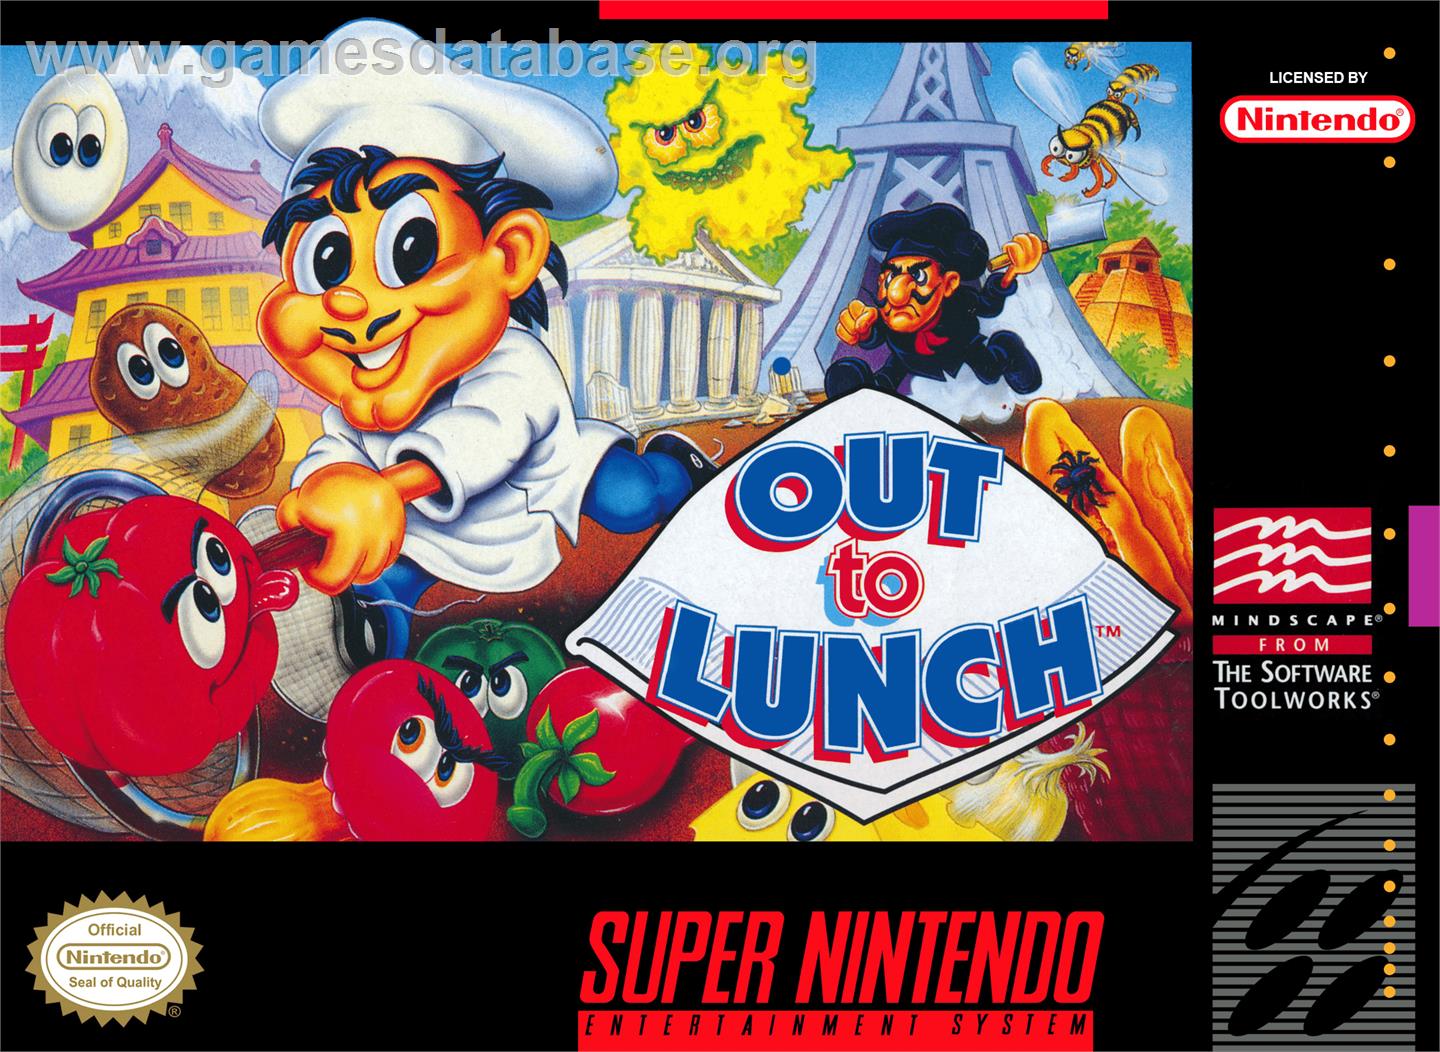 Out to Lunch - Nintendo SNES - Artwork - Box